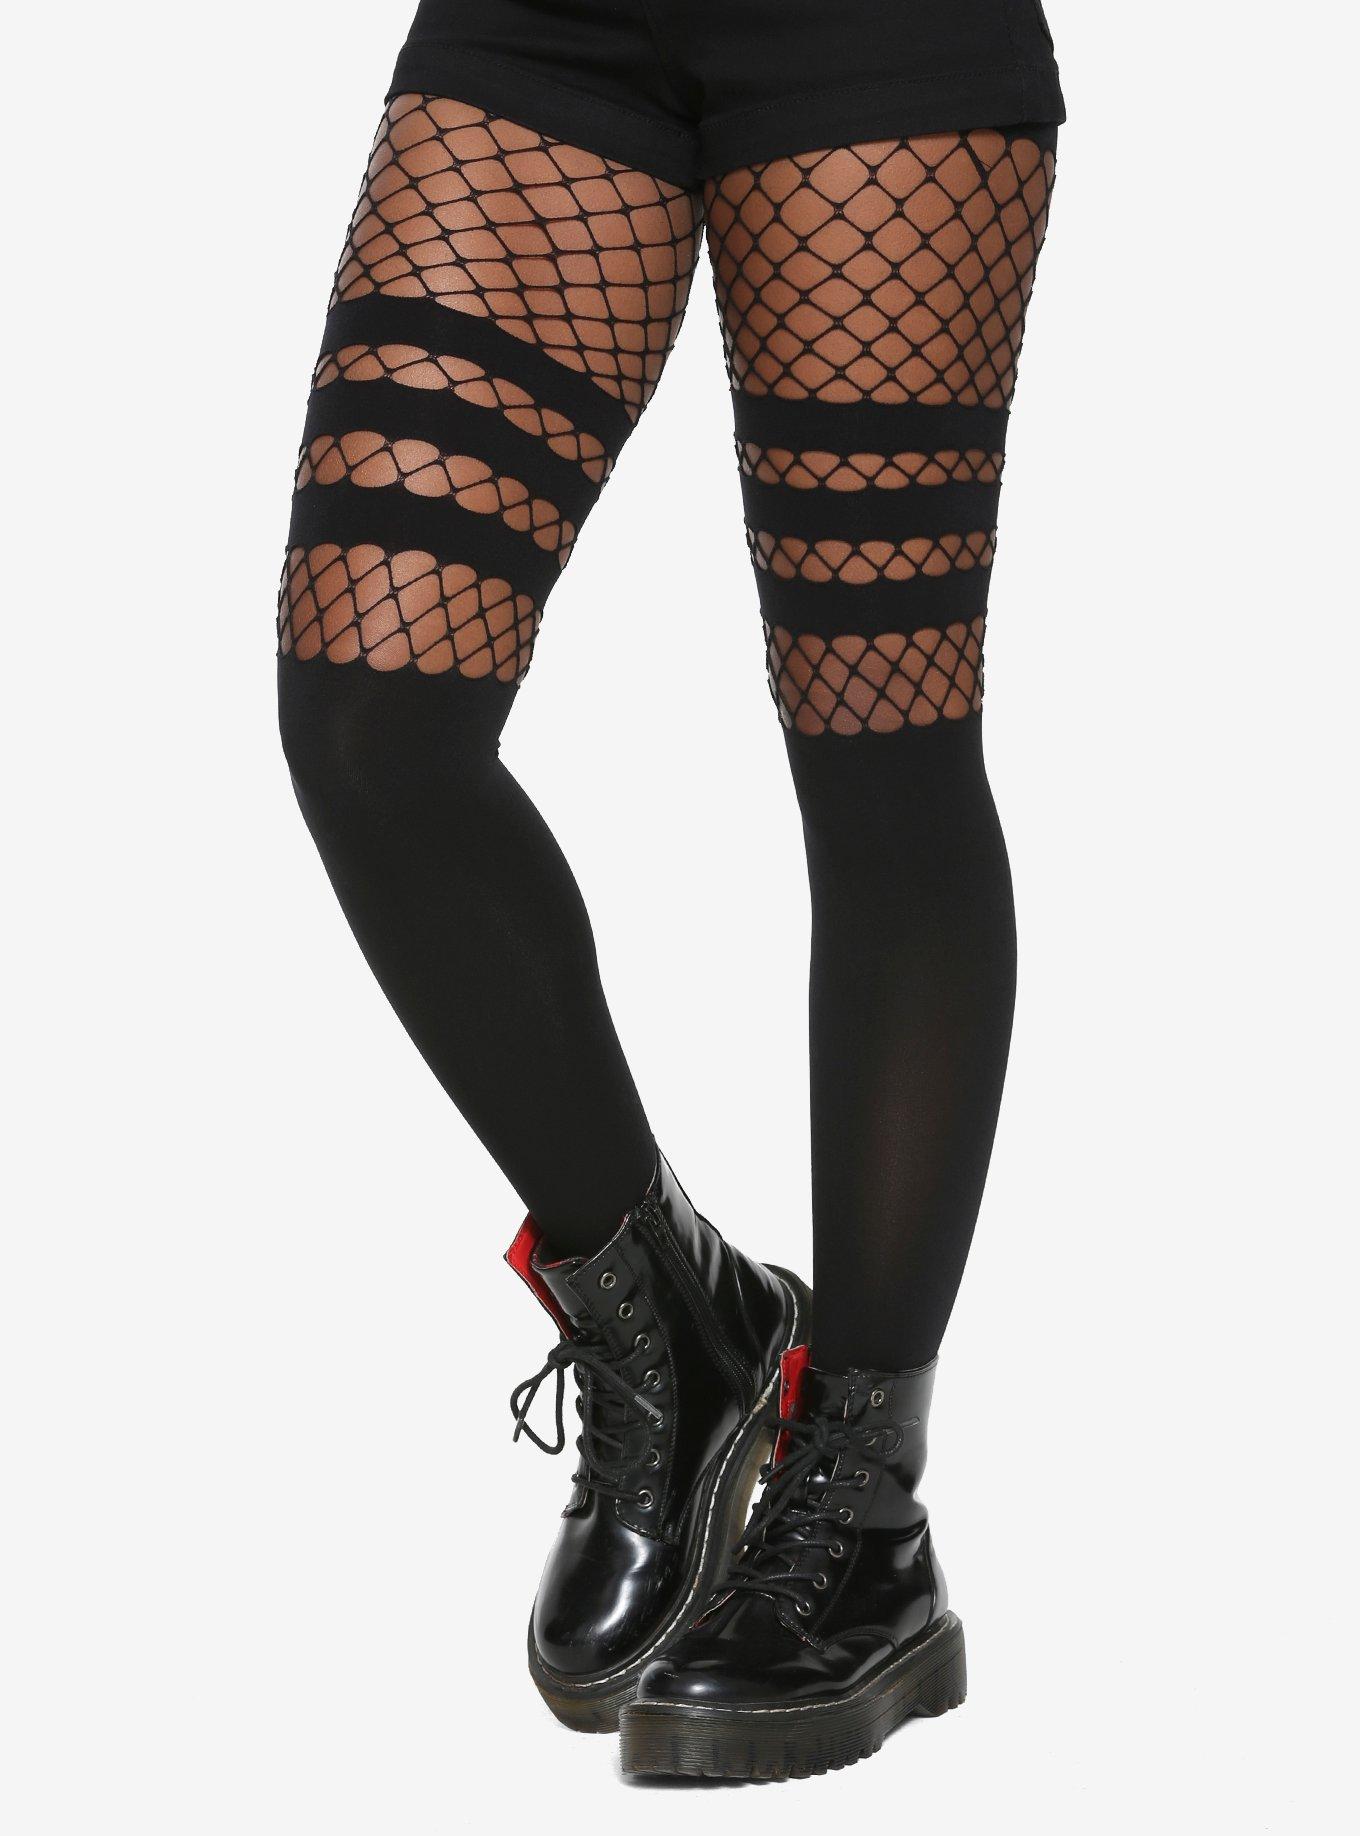 Thigh High Fishnet One Size Fits Most Womens Fishnet Thigh High Stockings 